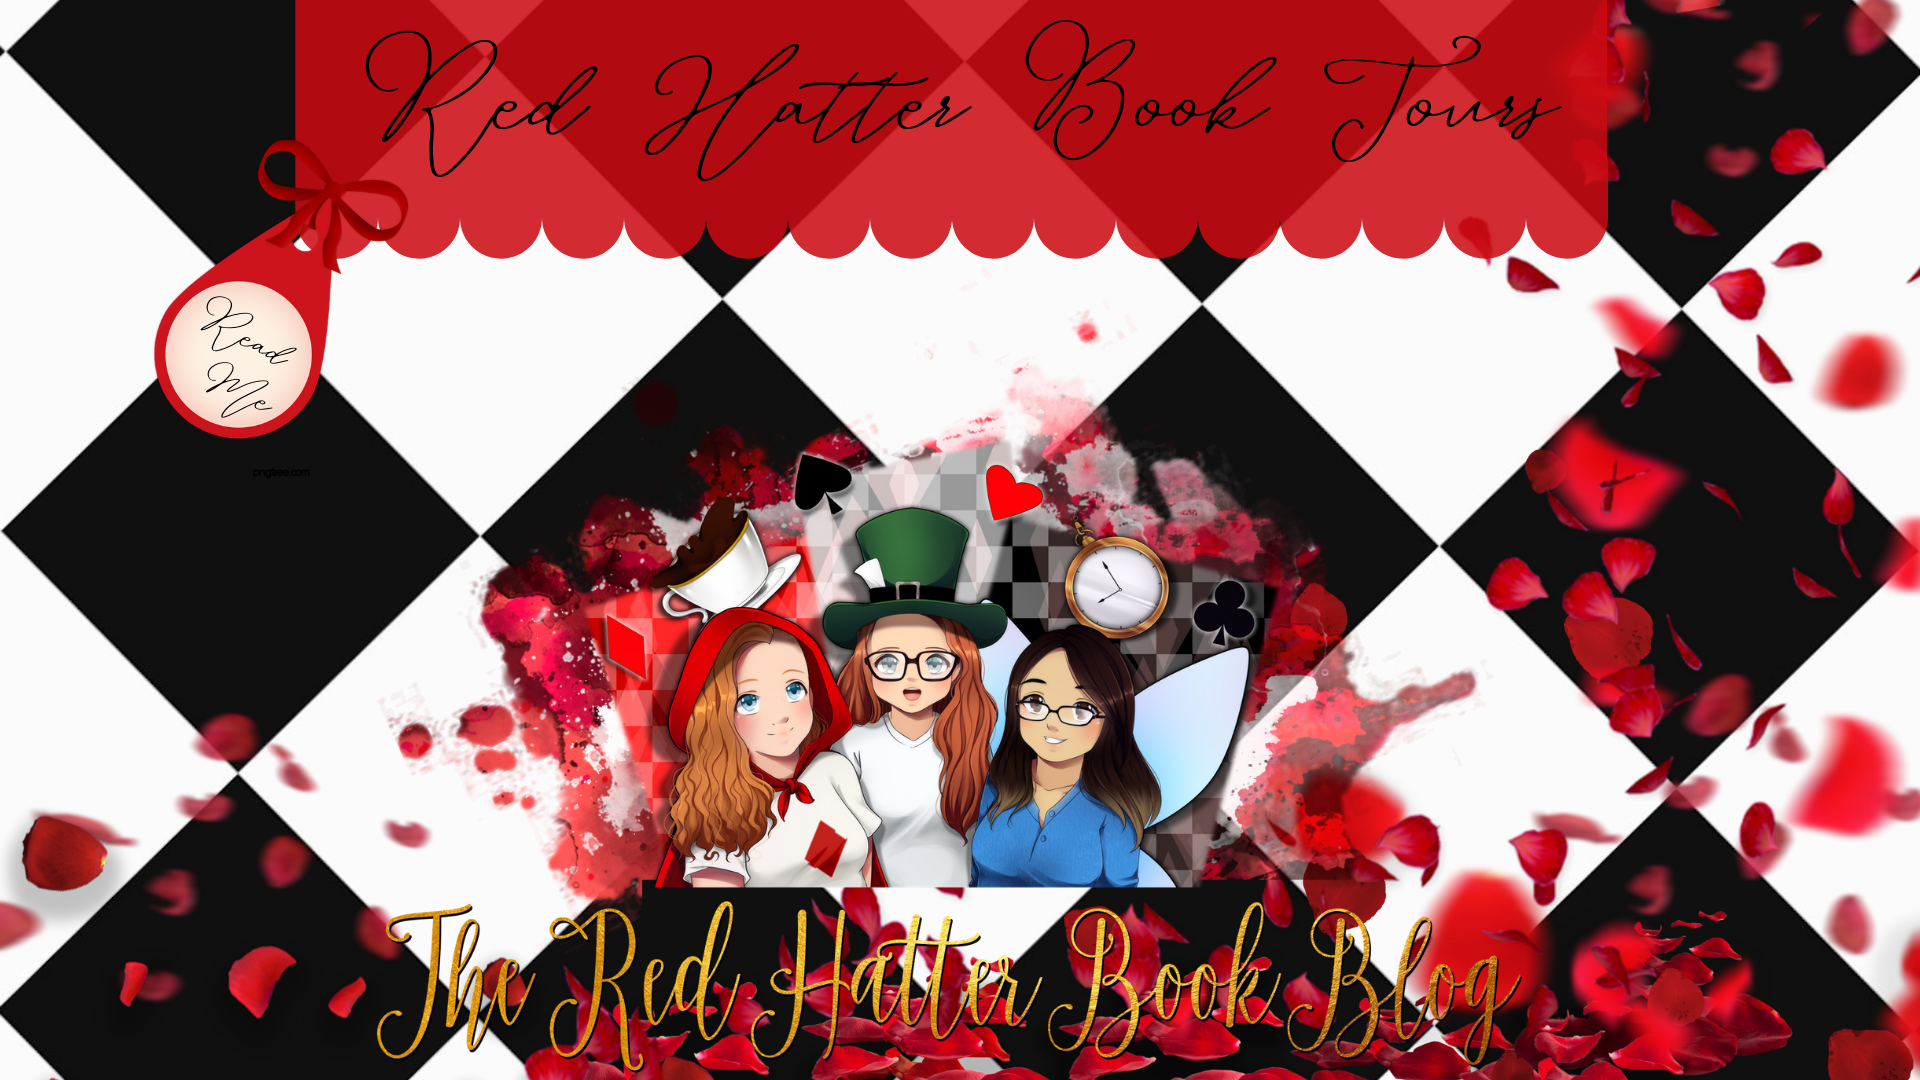 Copy of Red Hatter Book Tours